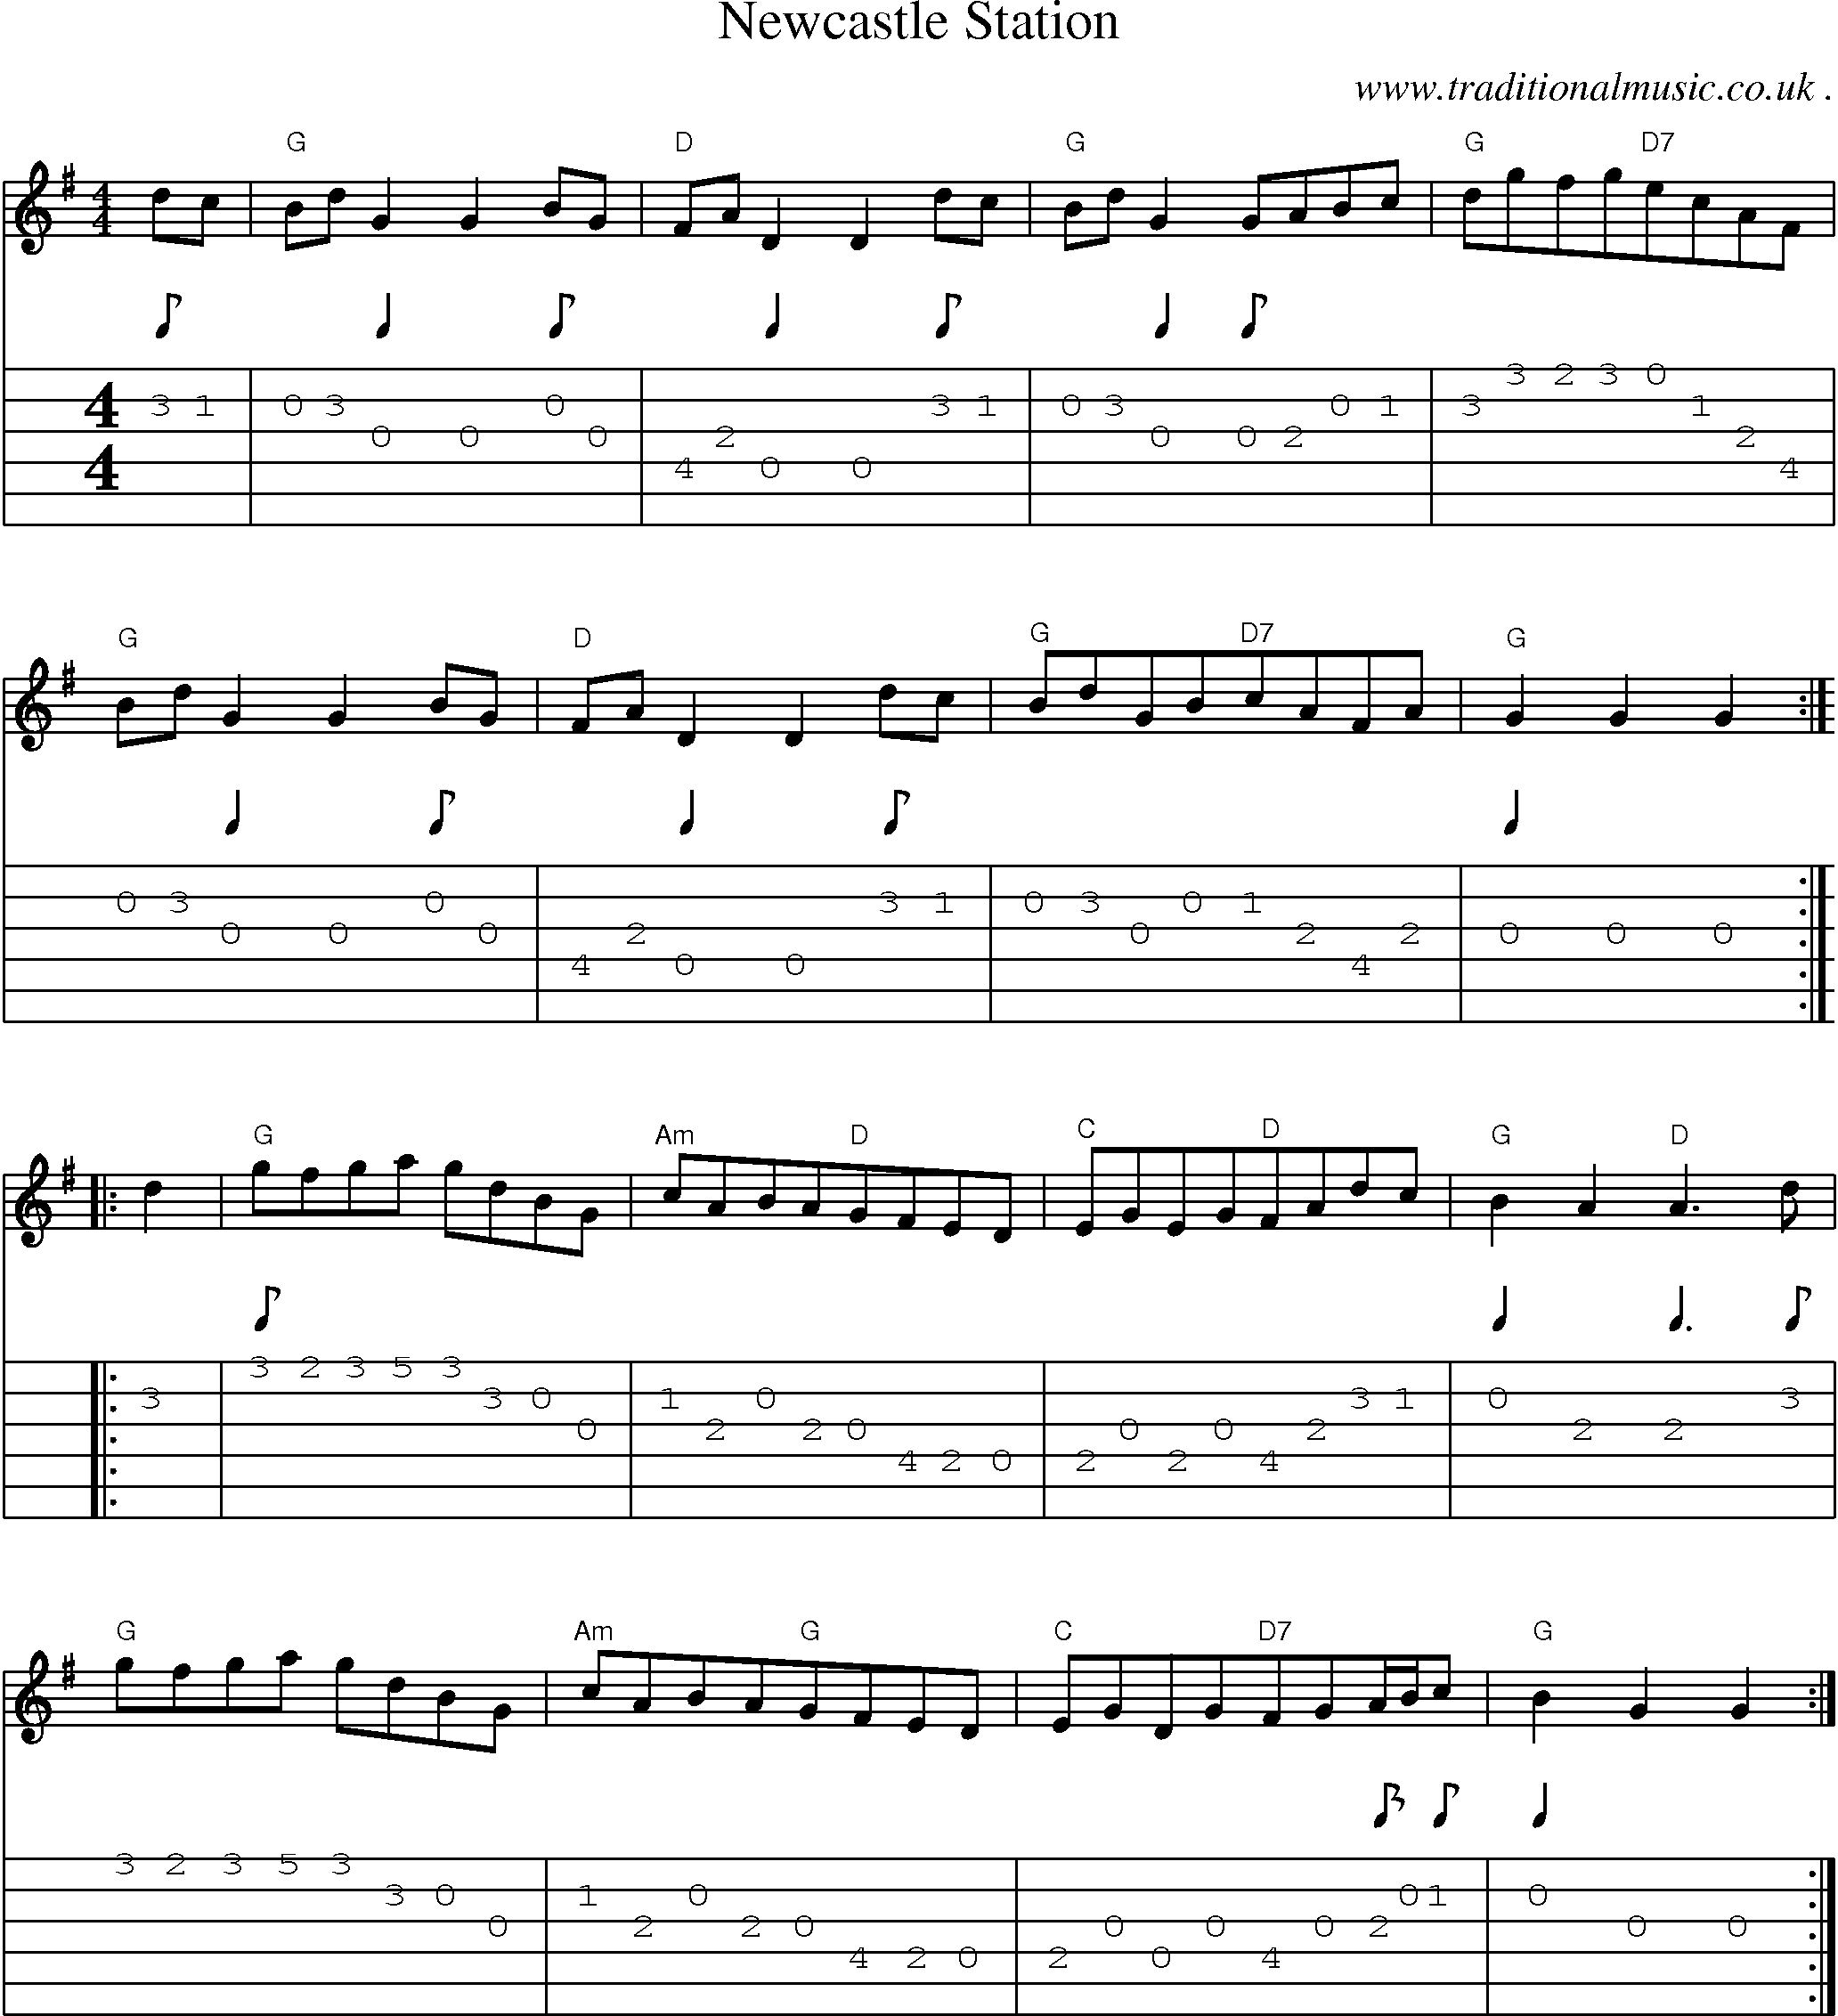 Sheet-Music and Guitar Tabs for Newcastle Station